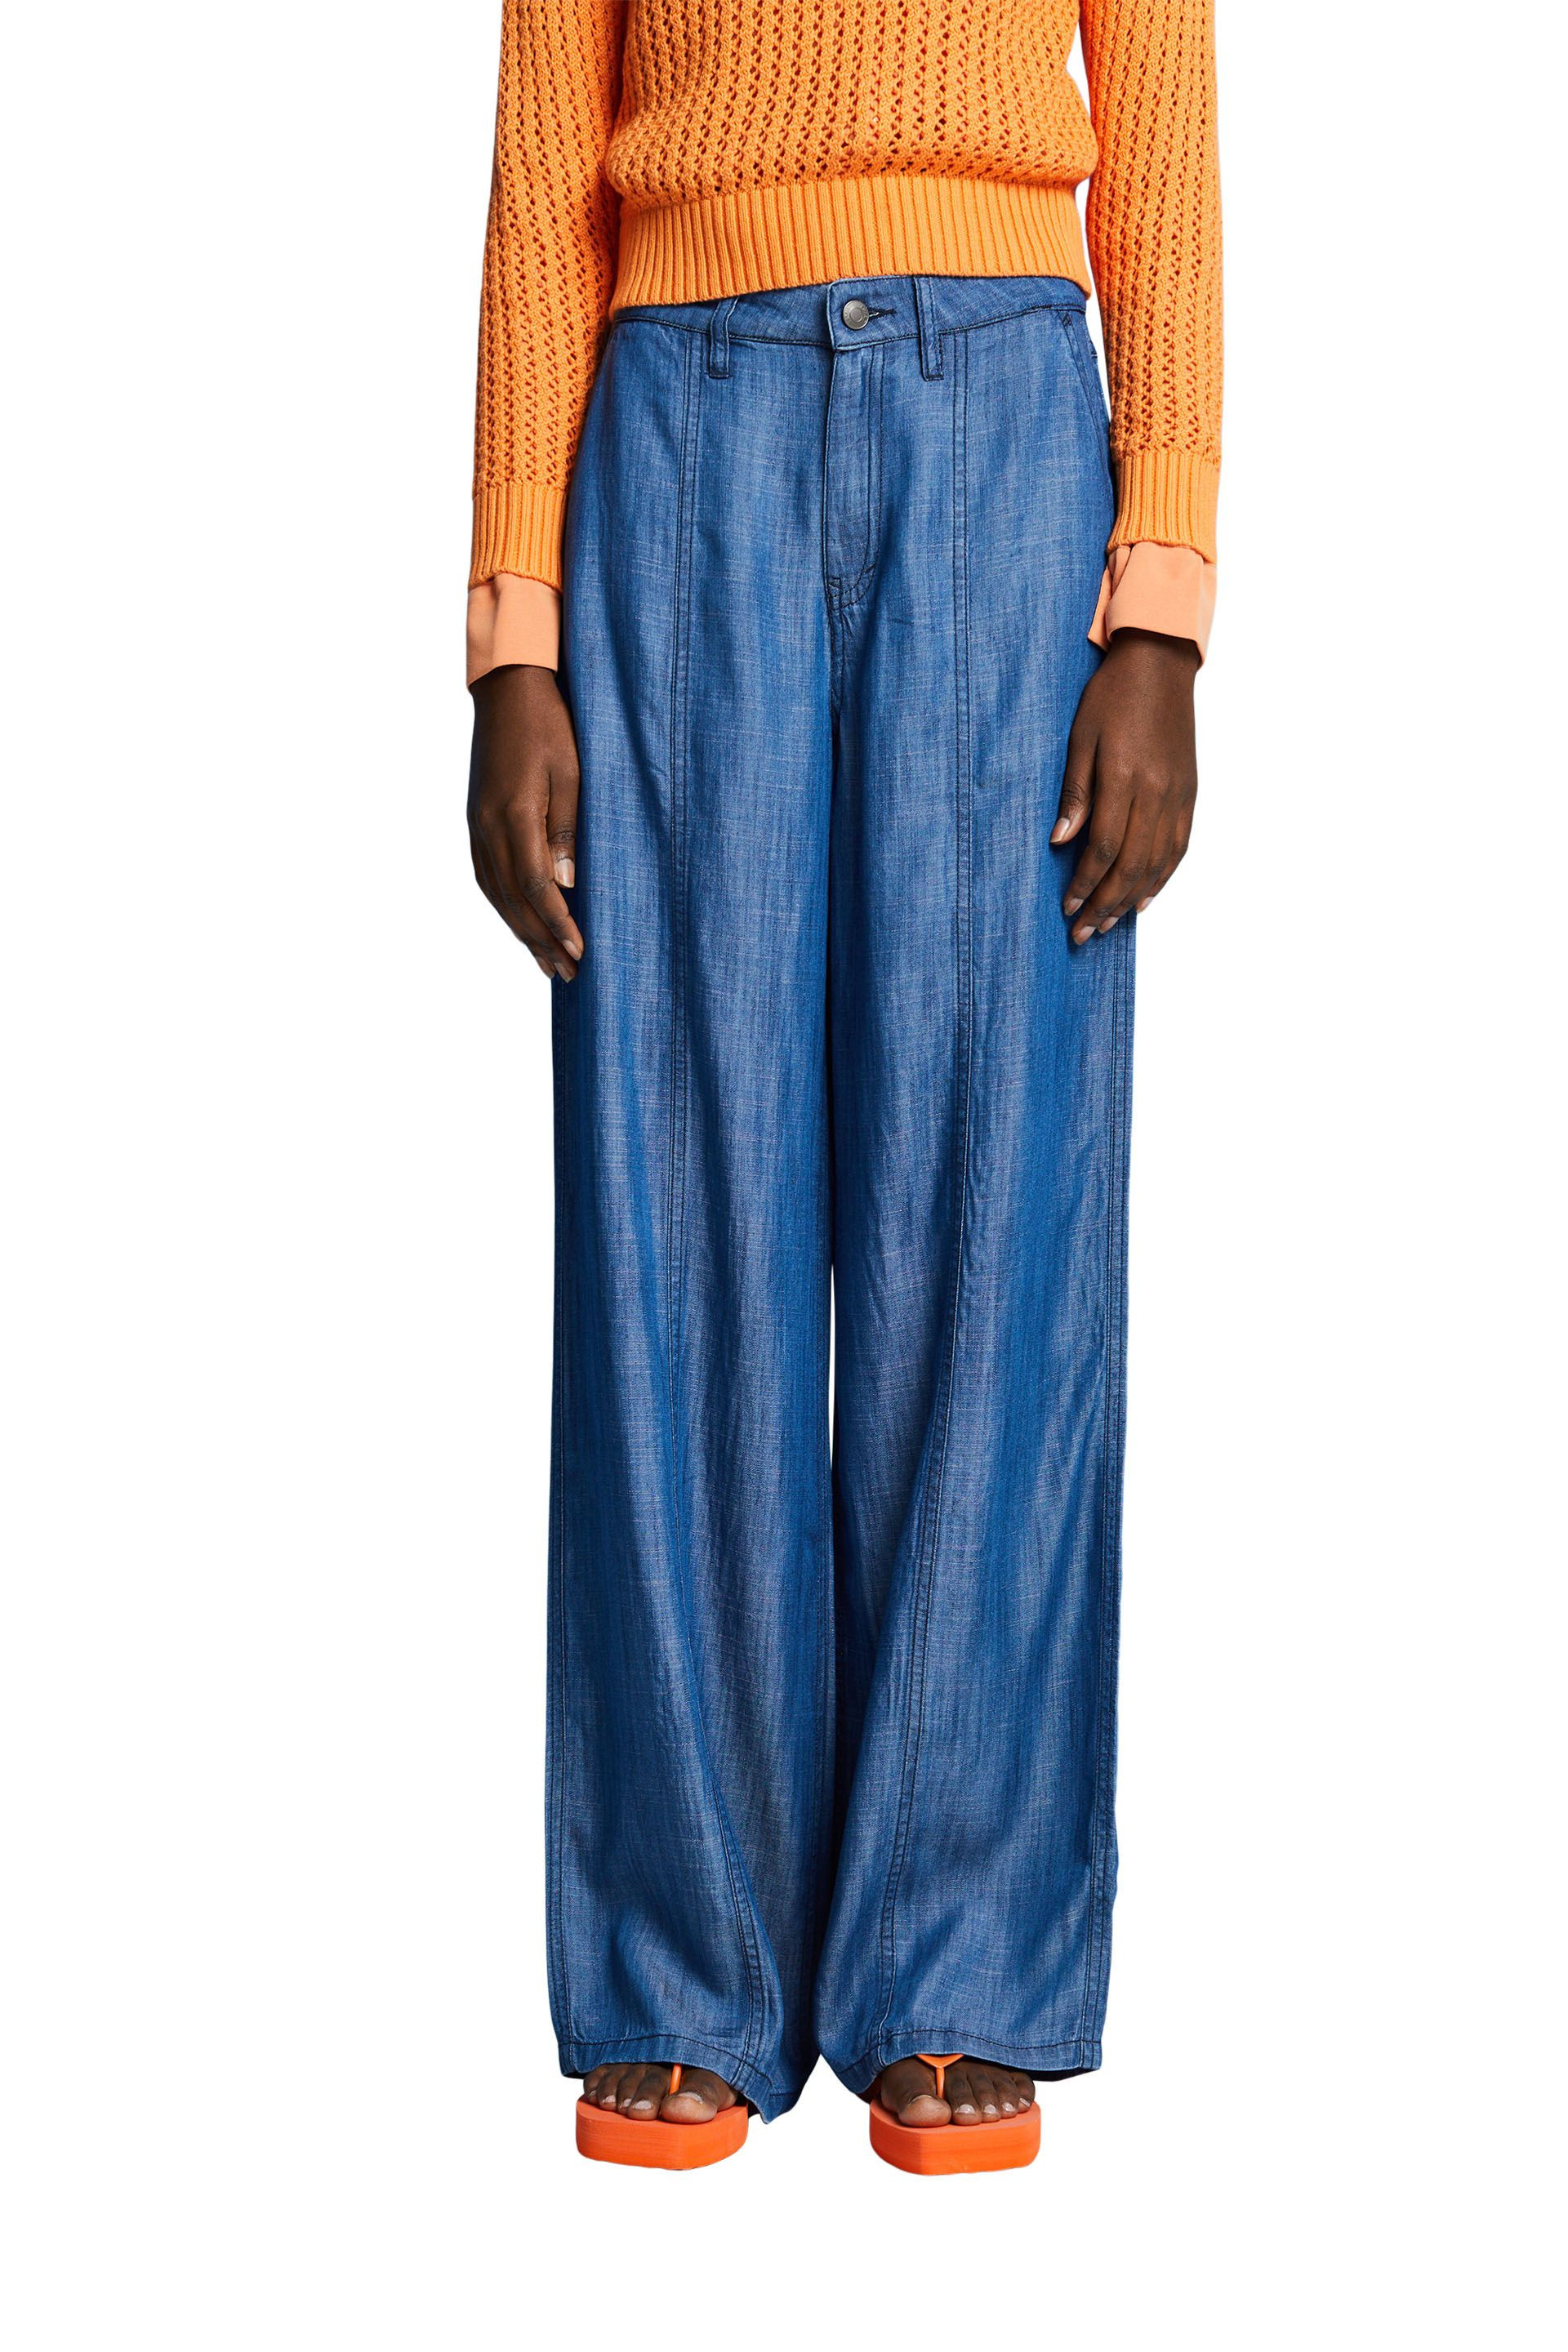 Esprit - Wide leg trousers and high waist, Denim, large image number 2